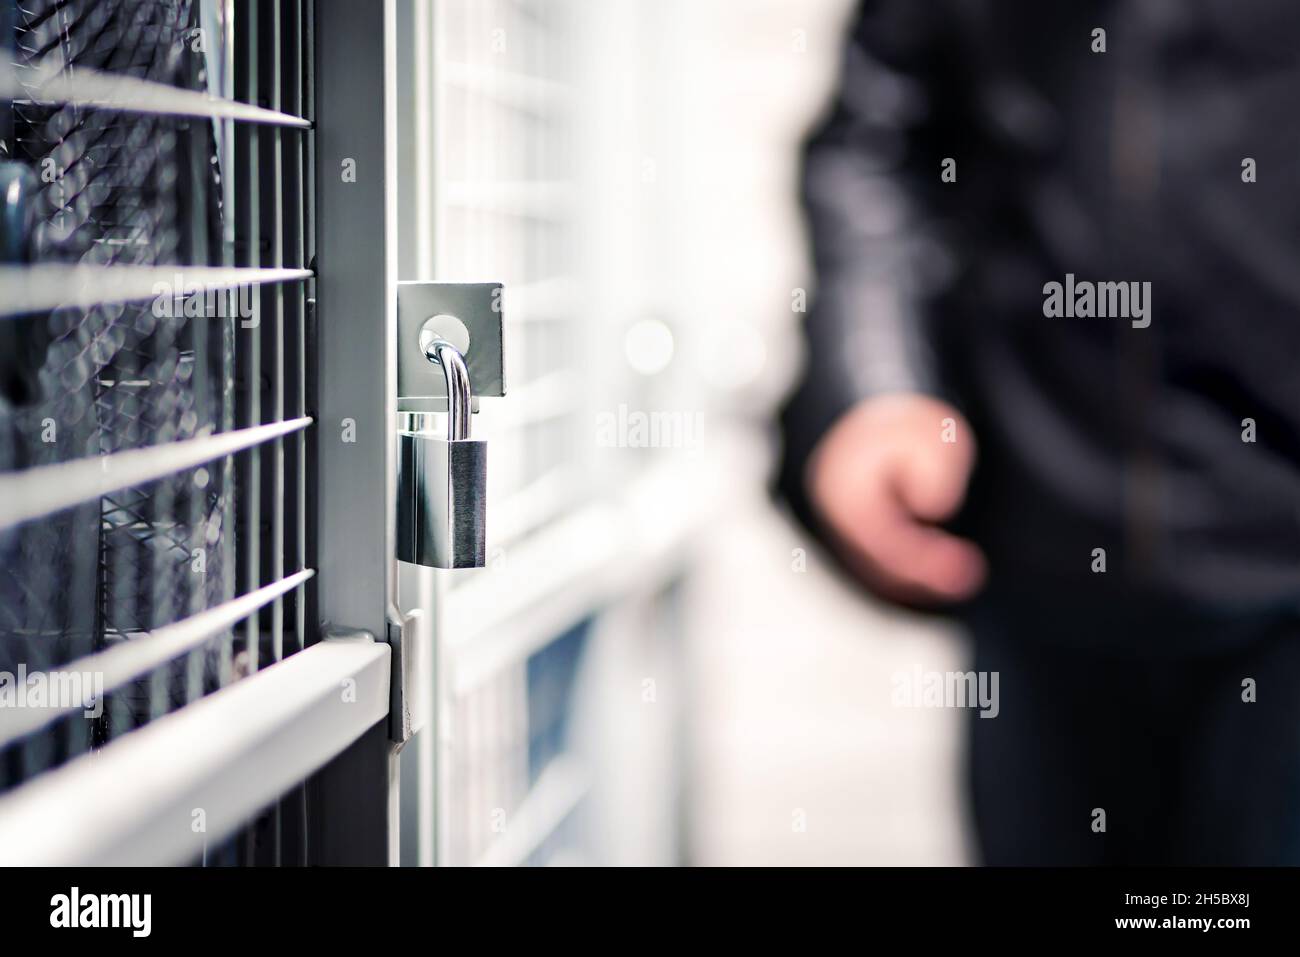 Burglar or thief and storage with lock in basement of condo apartment building. Suspicious man, intruder and criminal. Door with padlock for security. Stock Photo